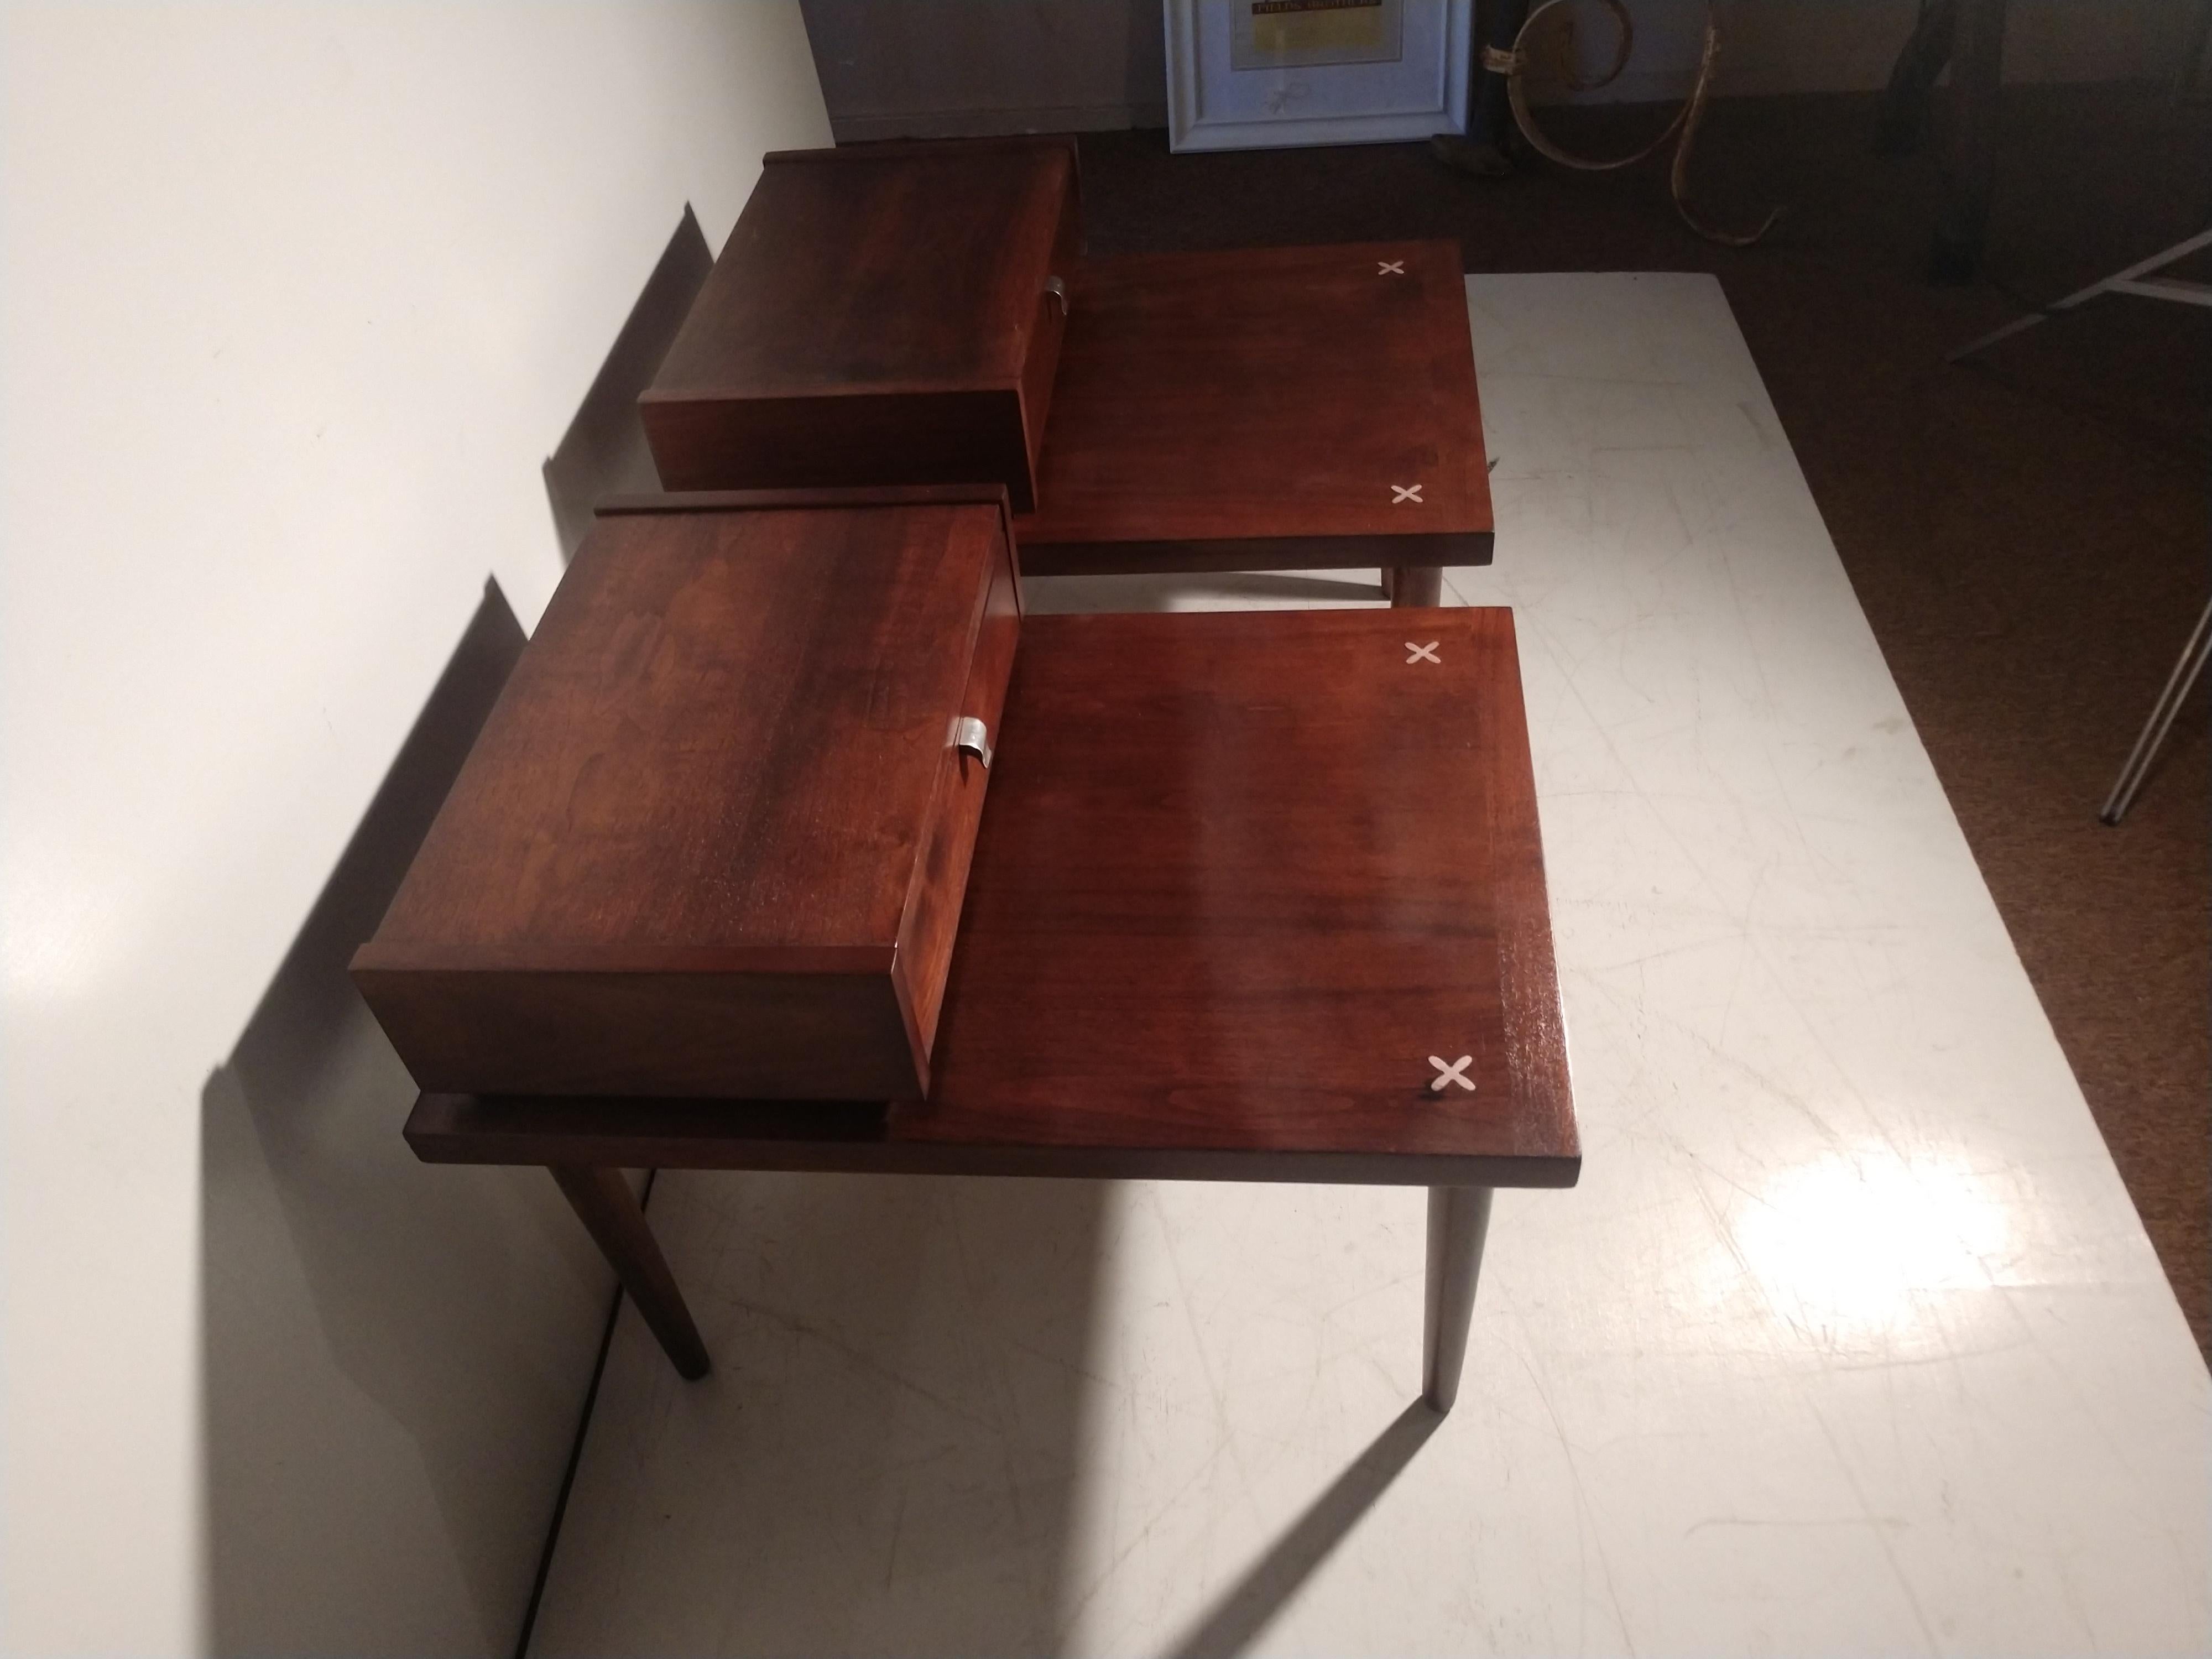 Pair of Mid-Century Modern Mahogany End Tables by Merton Gershun In Good Condition For Sale In Port Jervis, NY